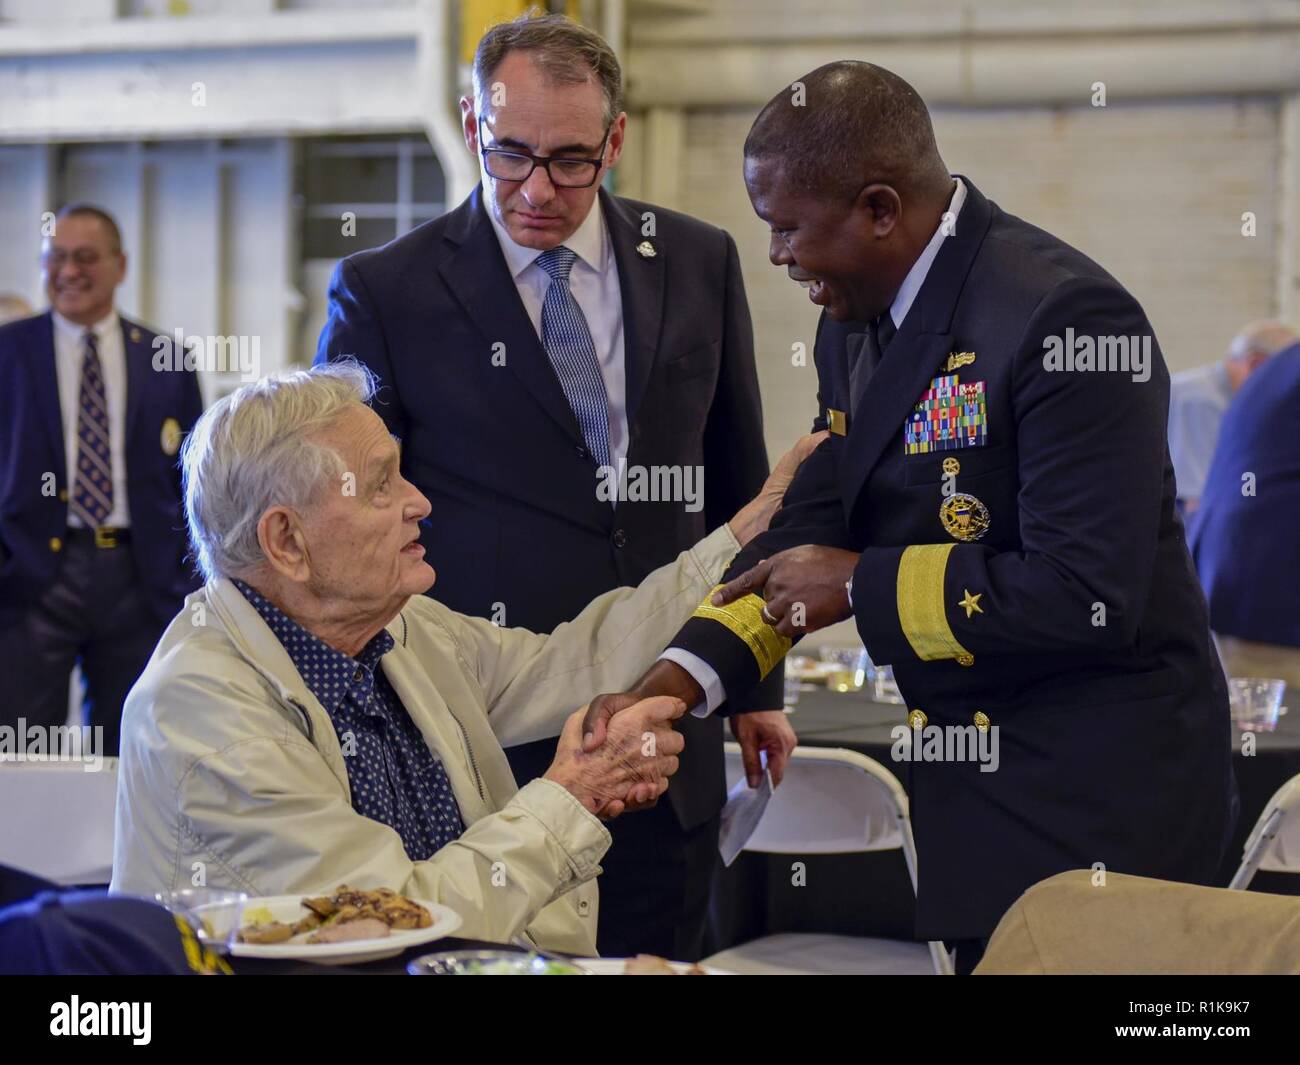 ALAMEDA, Calif.  (Oct. 8 2018) Rear Adm. Cedric Pringle, right, commander of Expeditionary Strike Group (ESG) 3, greets retired Chief Petty Officer, Richard 'Johnny' Johnson, a Pearl Harbor survivor, during a luncheon hosted aboard the USS Hornet Museum by the Naval Order of the United States during San Francisco Fleet Week 2018. San Francisco Fleet Week is an opportunity for the American public to meet their Navy, Marine Corps and Coast Guard teams and experience America‚Äôs sea services. During Fleet Week, service members participate in various community service events, showcase capabilities Stock Photo